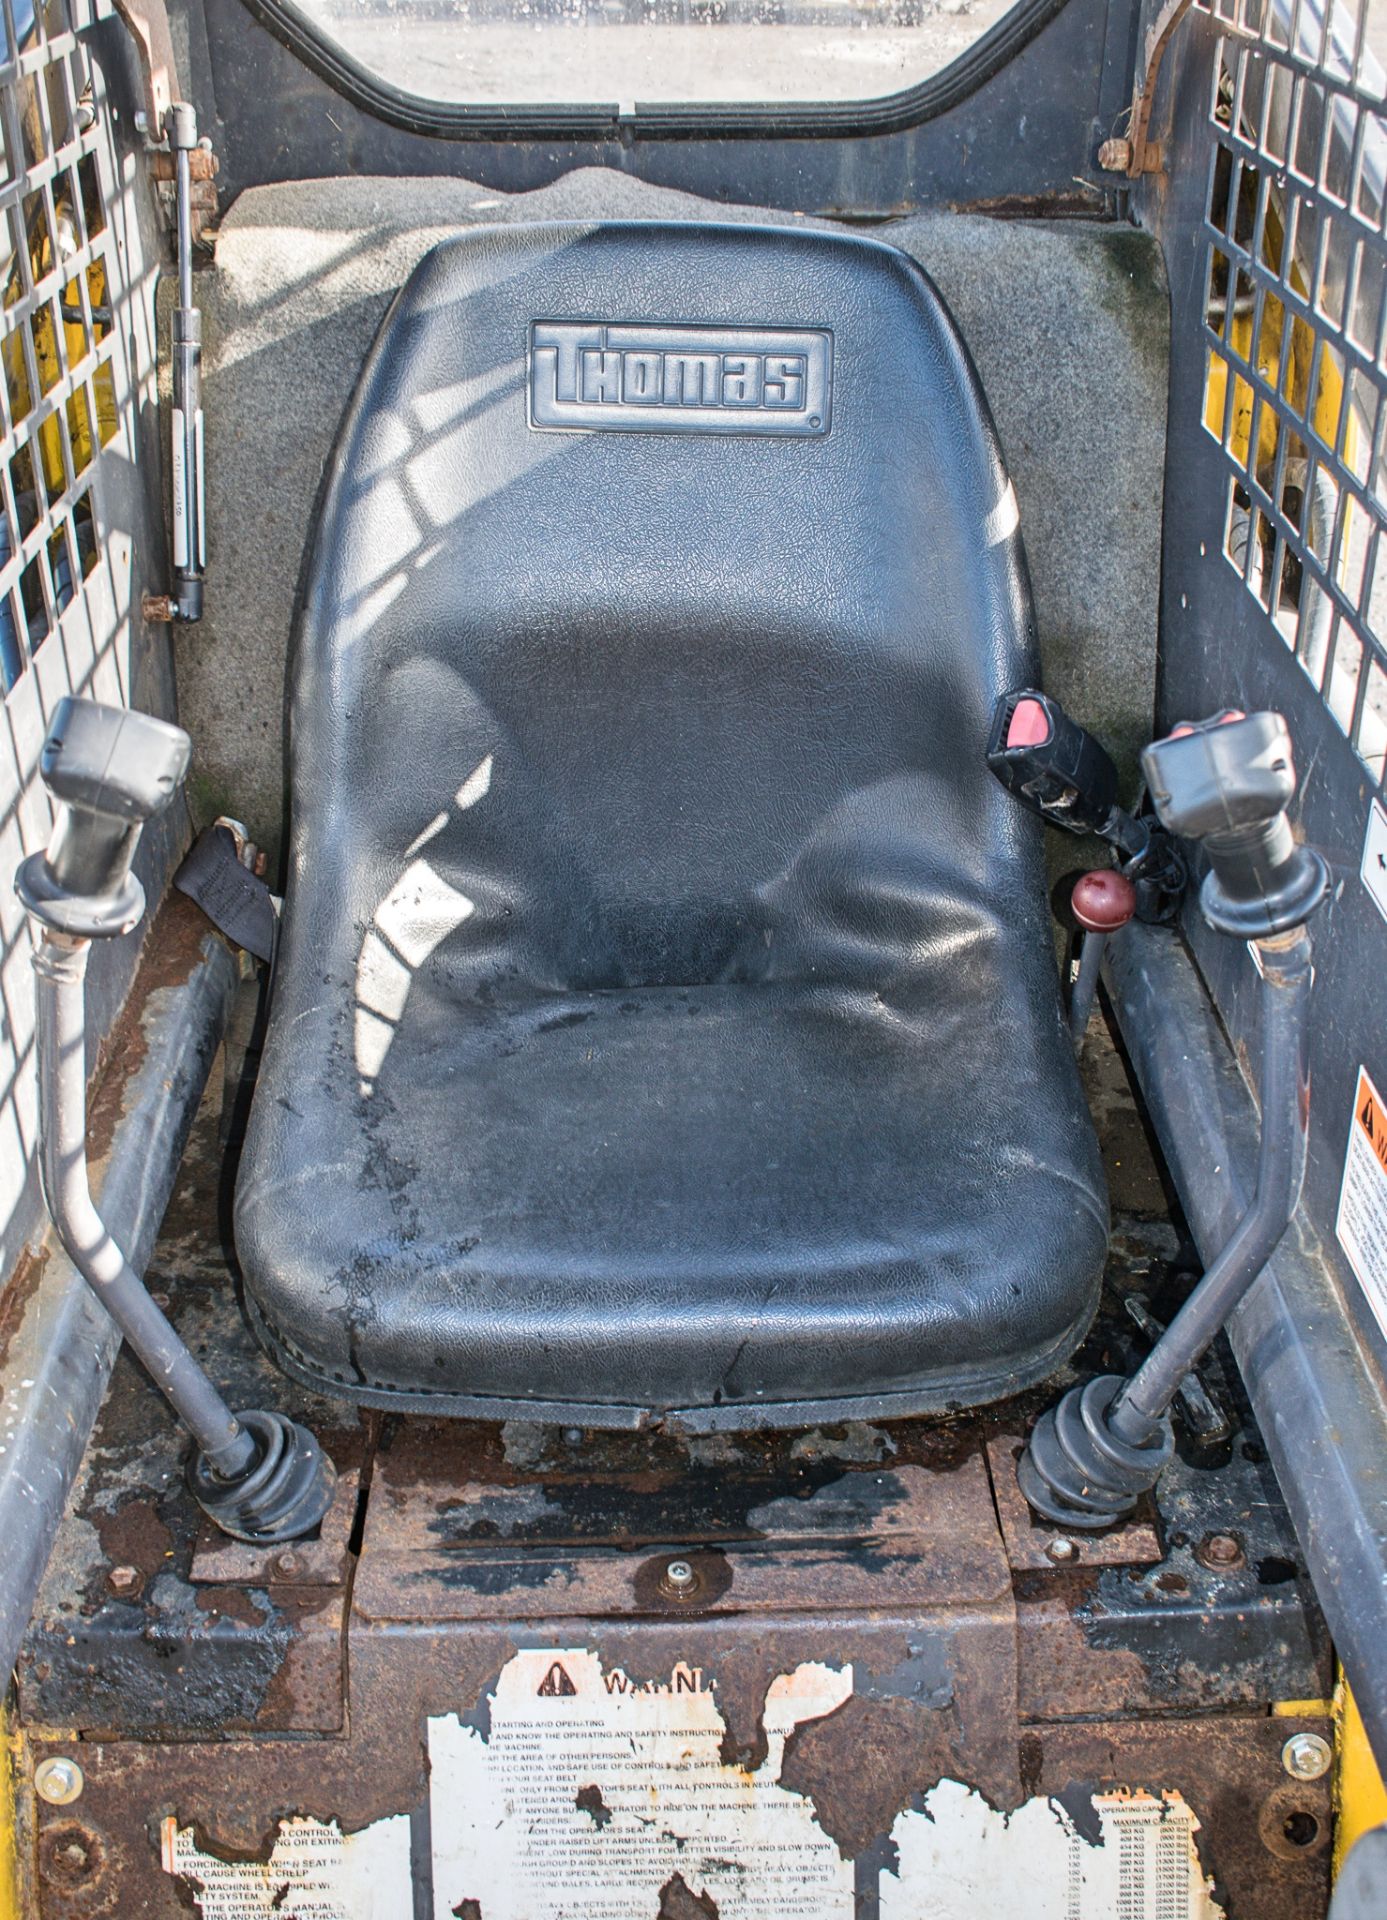 Thomas 105 skid steer loader Year: 2010 S/N: LC100BCE/2008 Recorded Hours: 1319 S7247 - Image 11 of 12